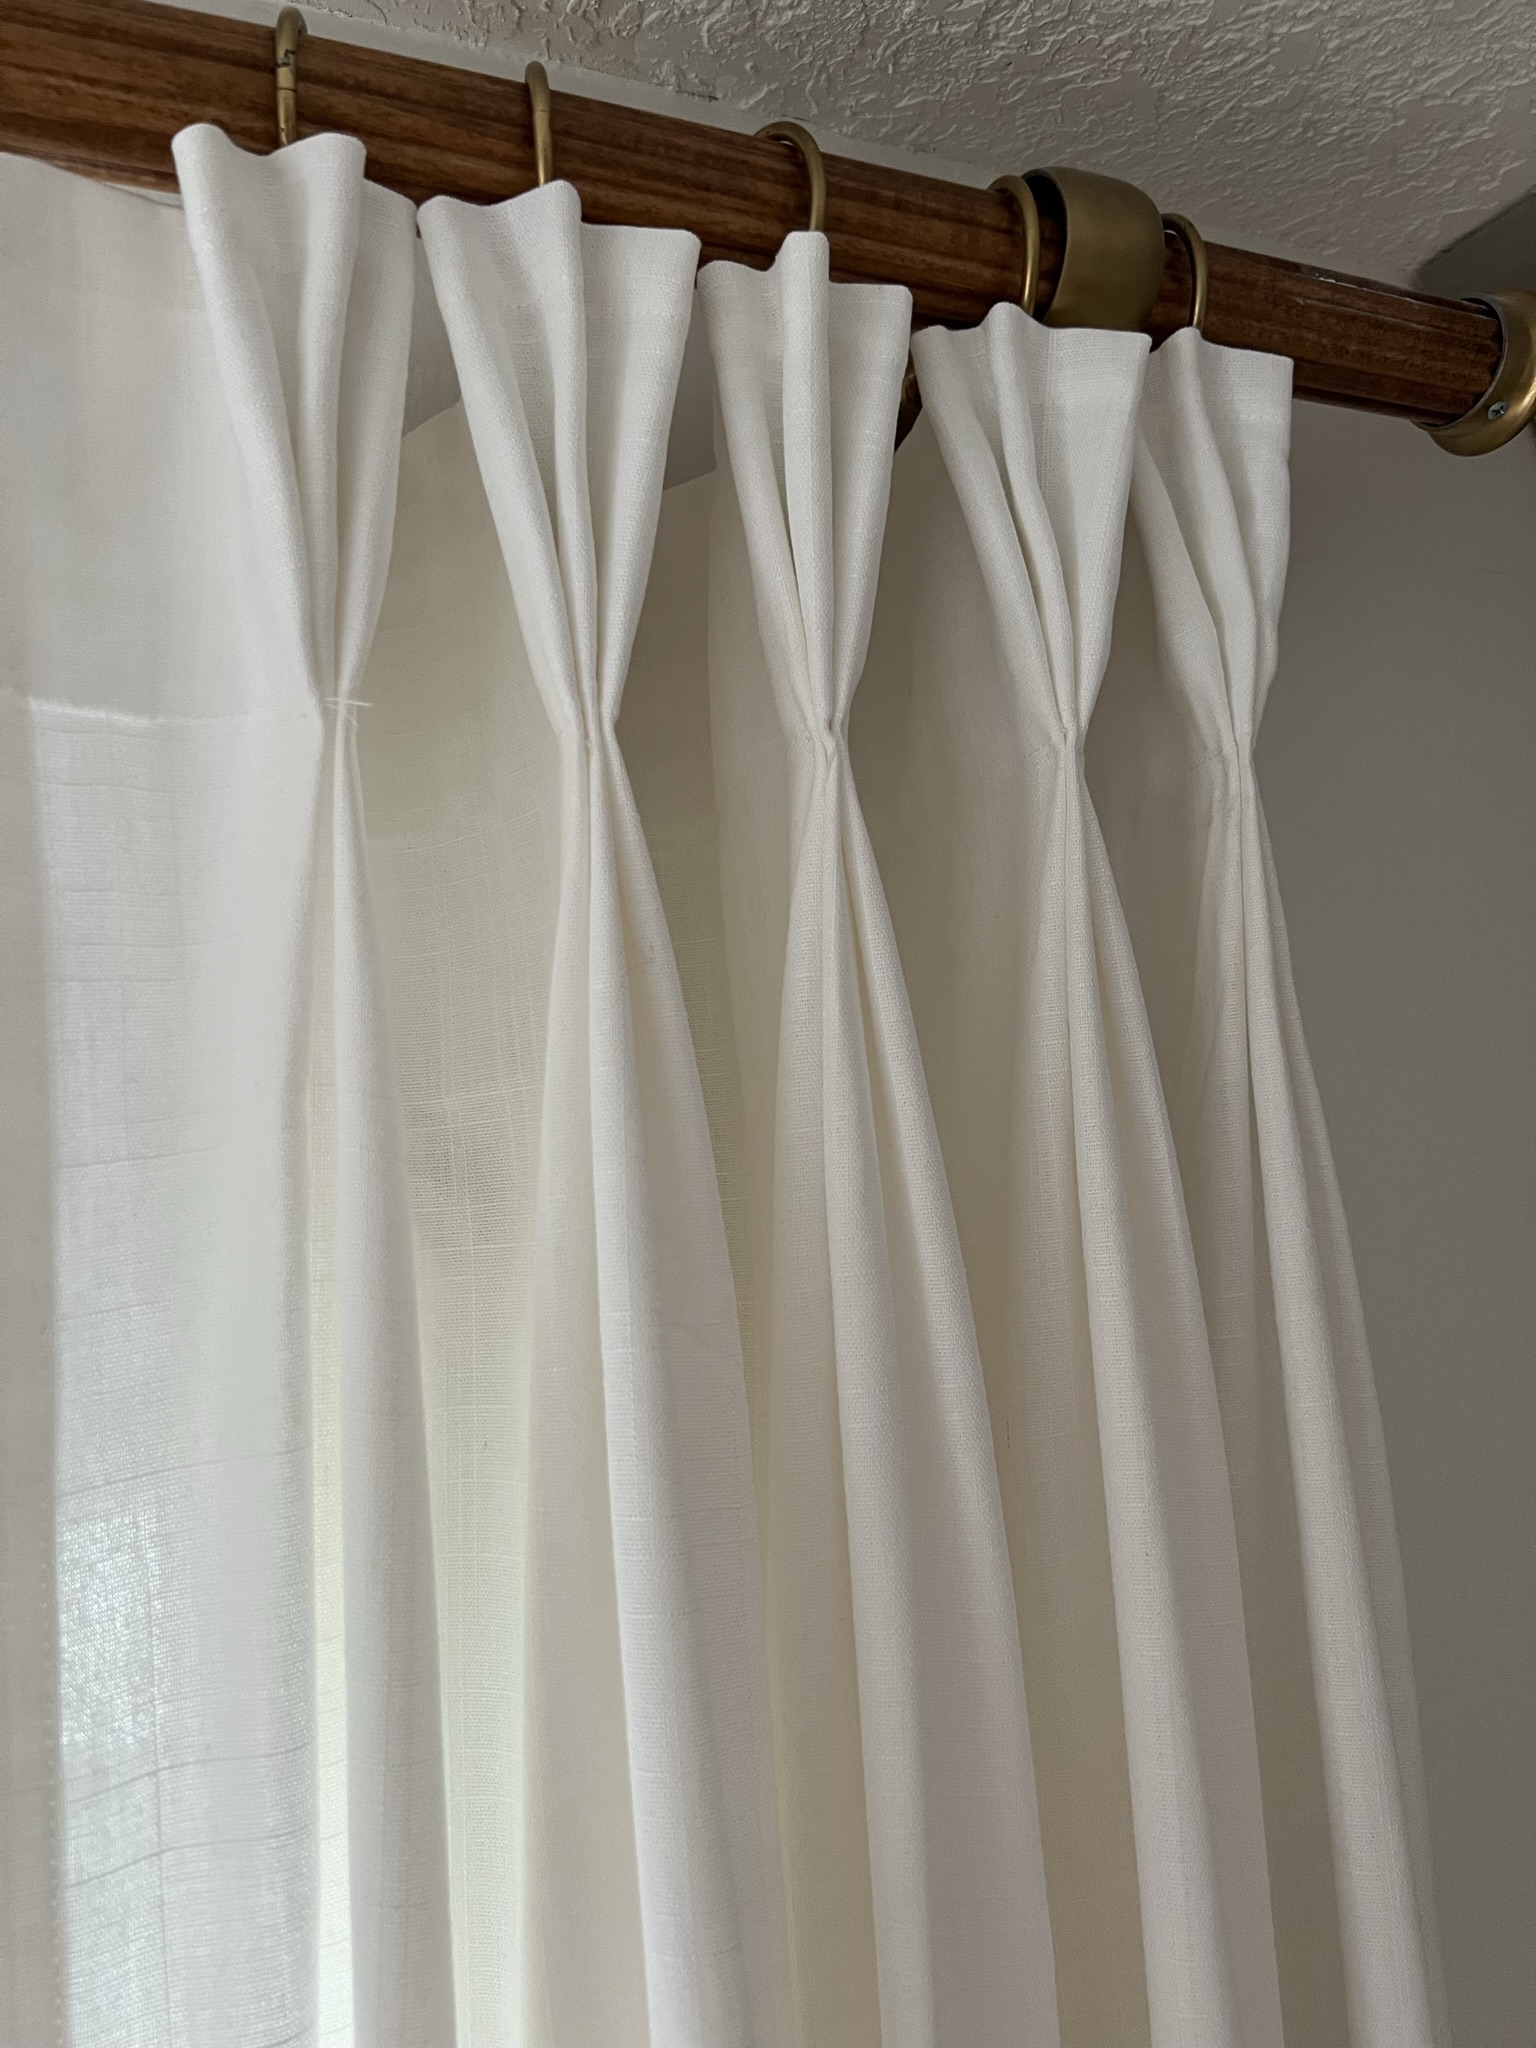 Close up of DIY Pinch pleat curtains near the top of the curtains showing the pleats and how they are hung on a wood and brass curtain rod